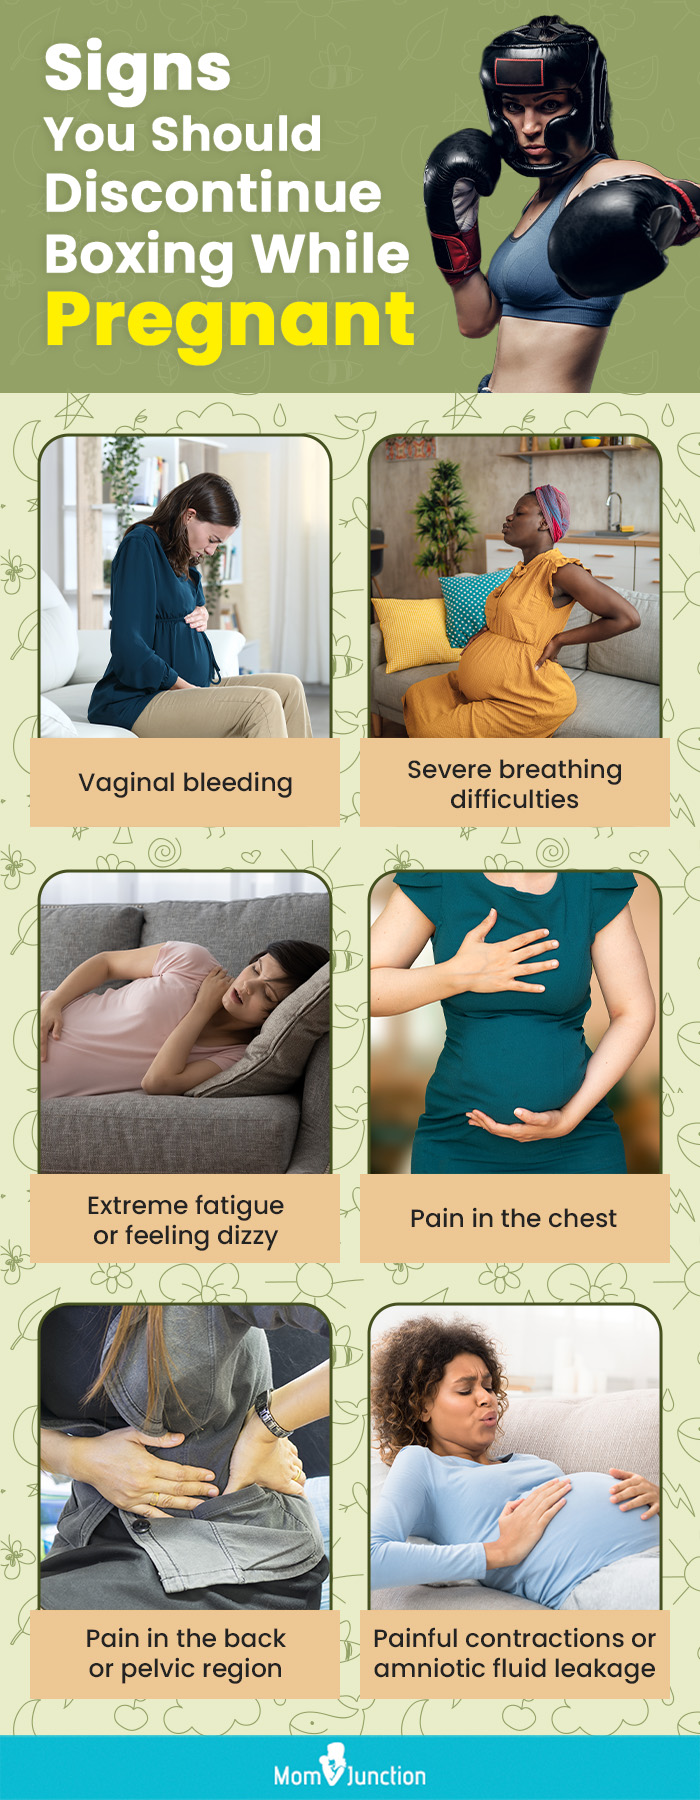 signs you should discontinue boxing while pregnant (infographic)